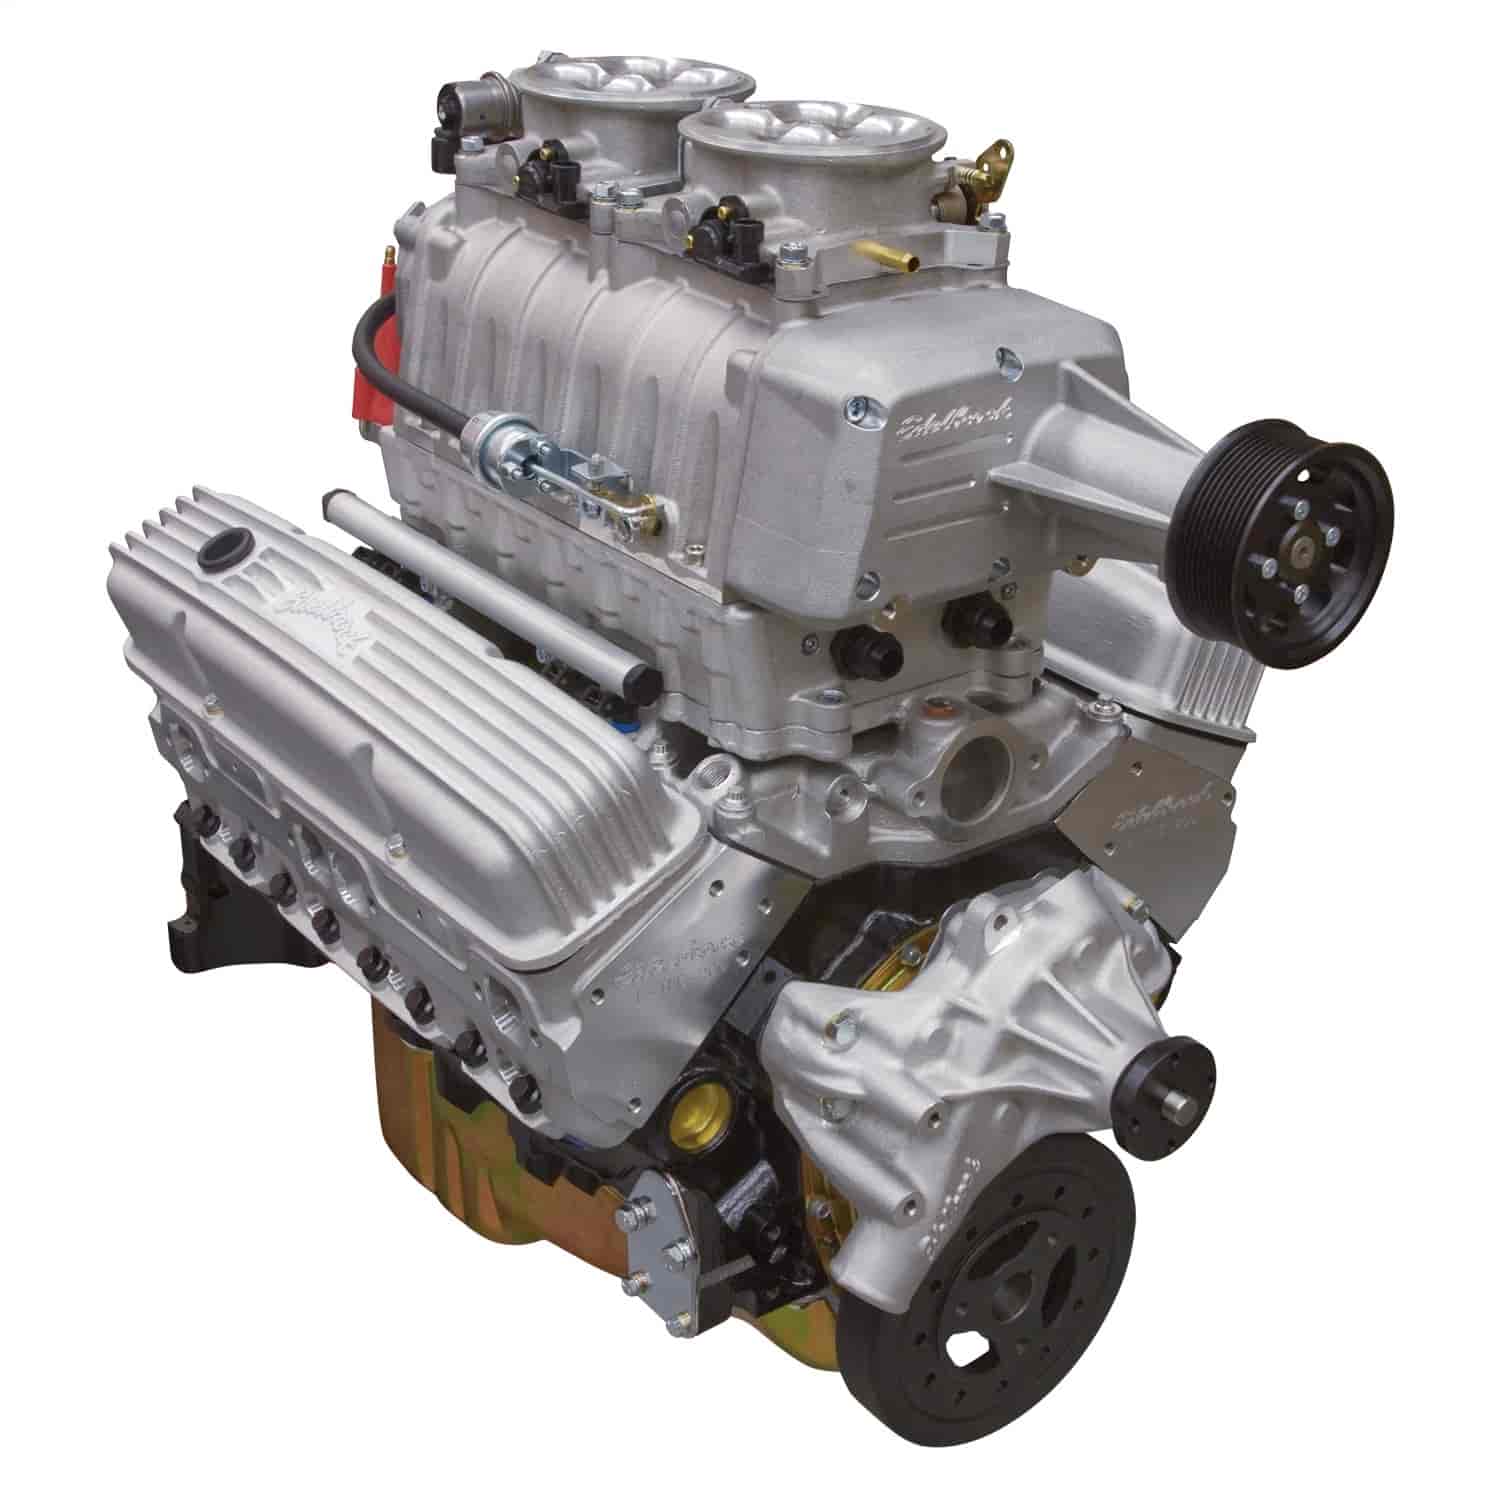 E-Force RPM Supercharged Small Block Chevy 350 Crate Engine EFI